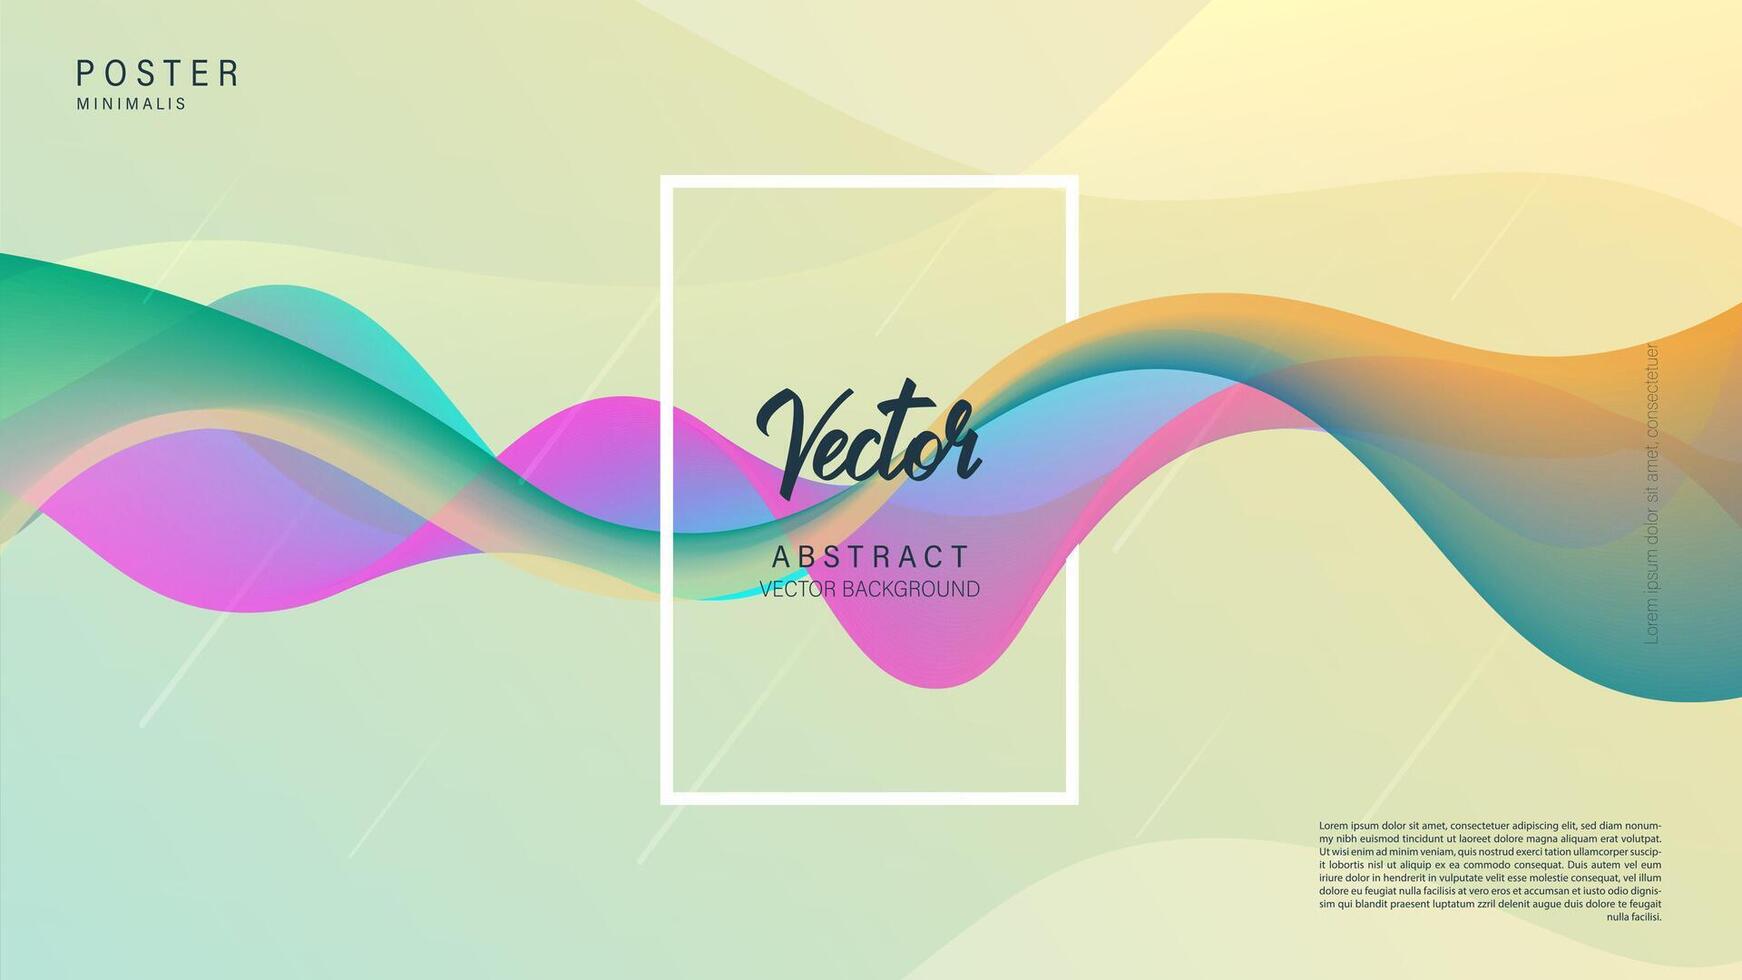 Beautiful banner colorful fluid loop background. Vector background 3d style can be used in cover design, book design, poster, cd cover, flyer, website backgrounds or advertising. Vector